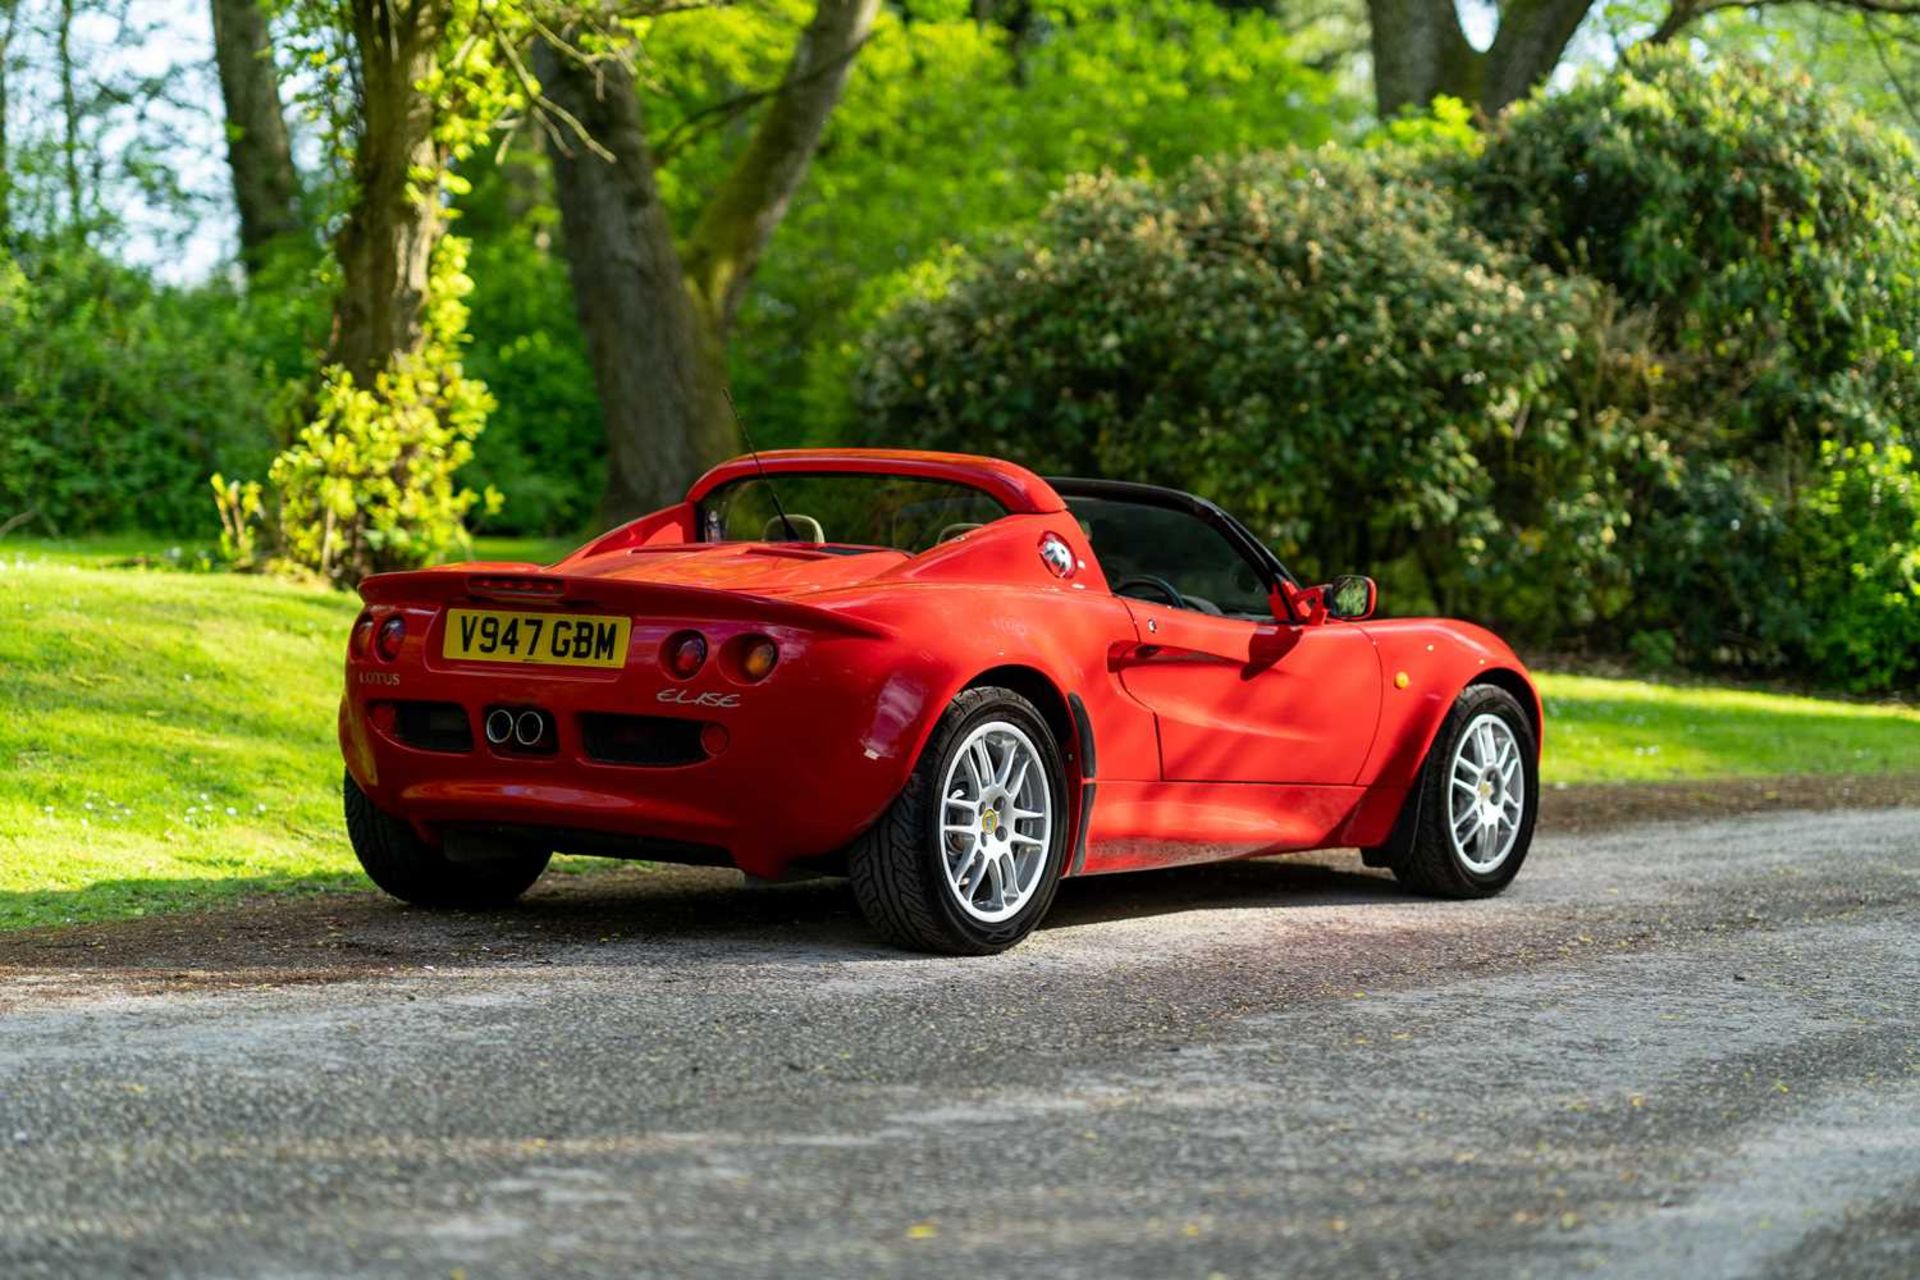 1999 Lotus Elise S1 Only 39,000 miles from new - Image 15 of 57